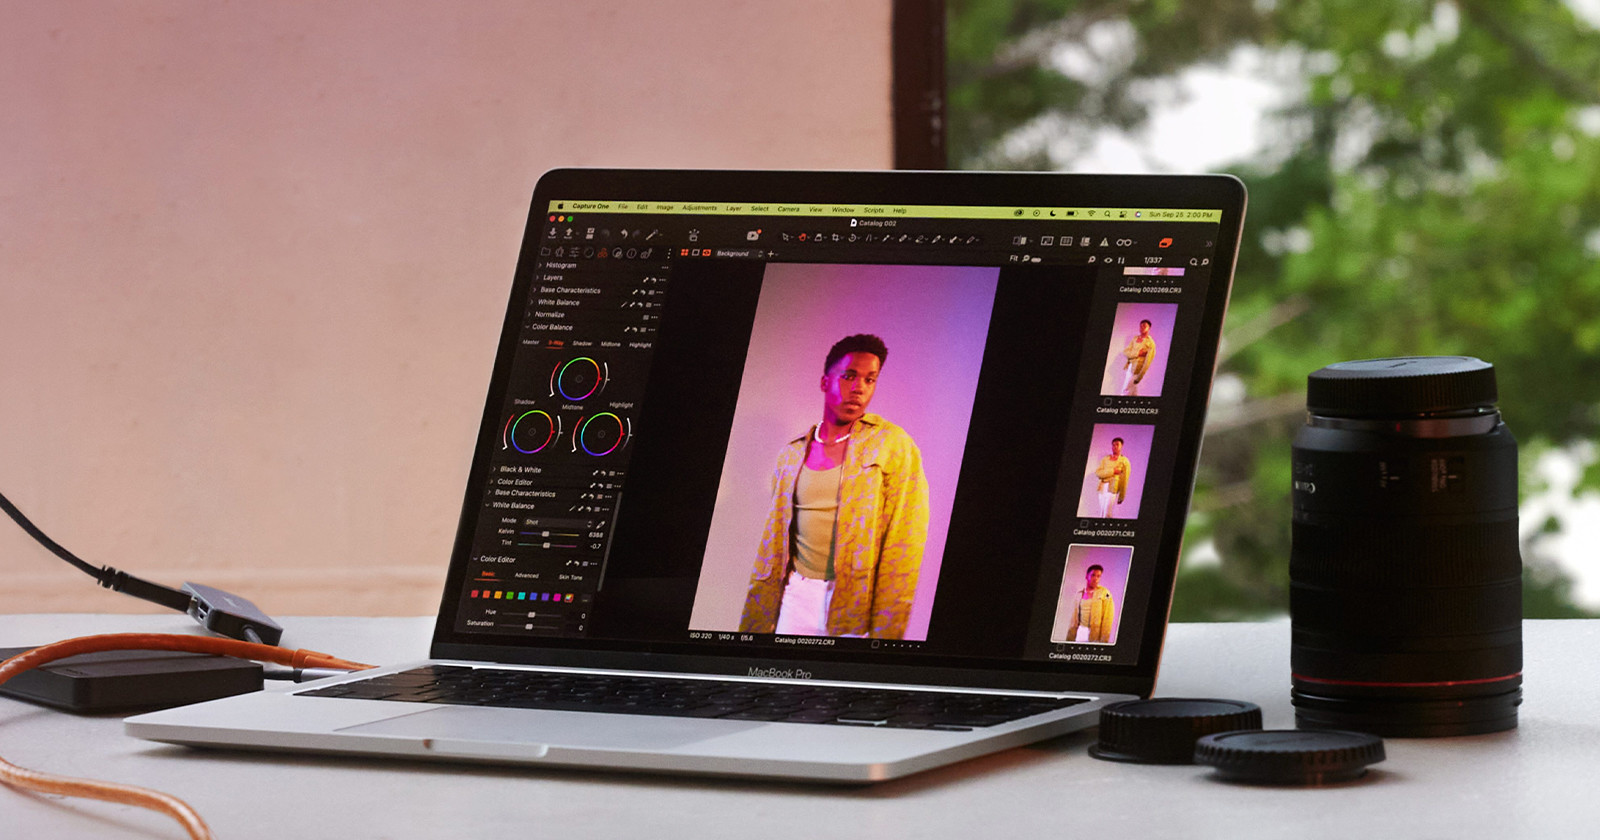  capture one perpetual licenses will longer receive 